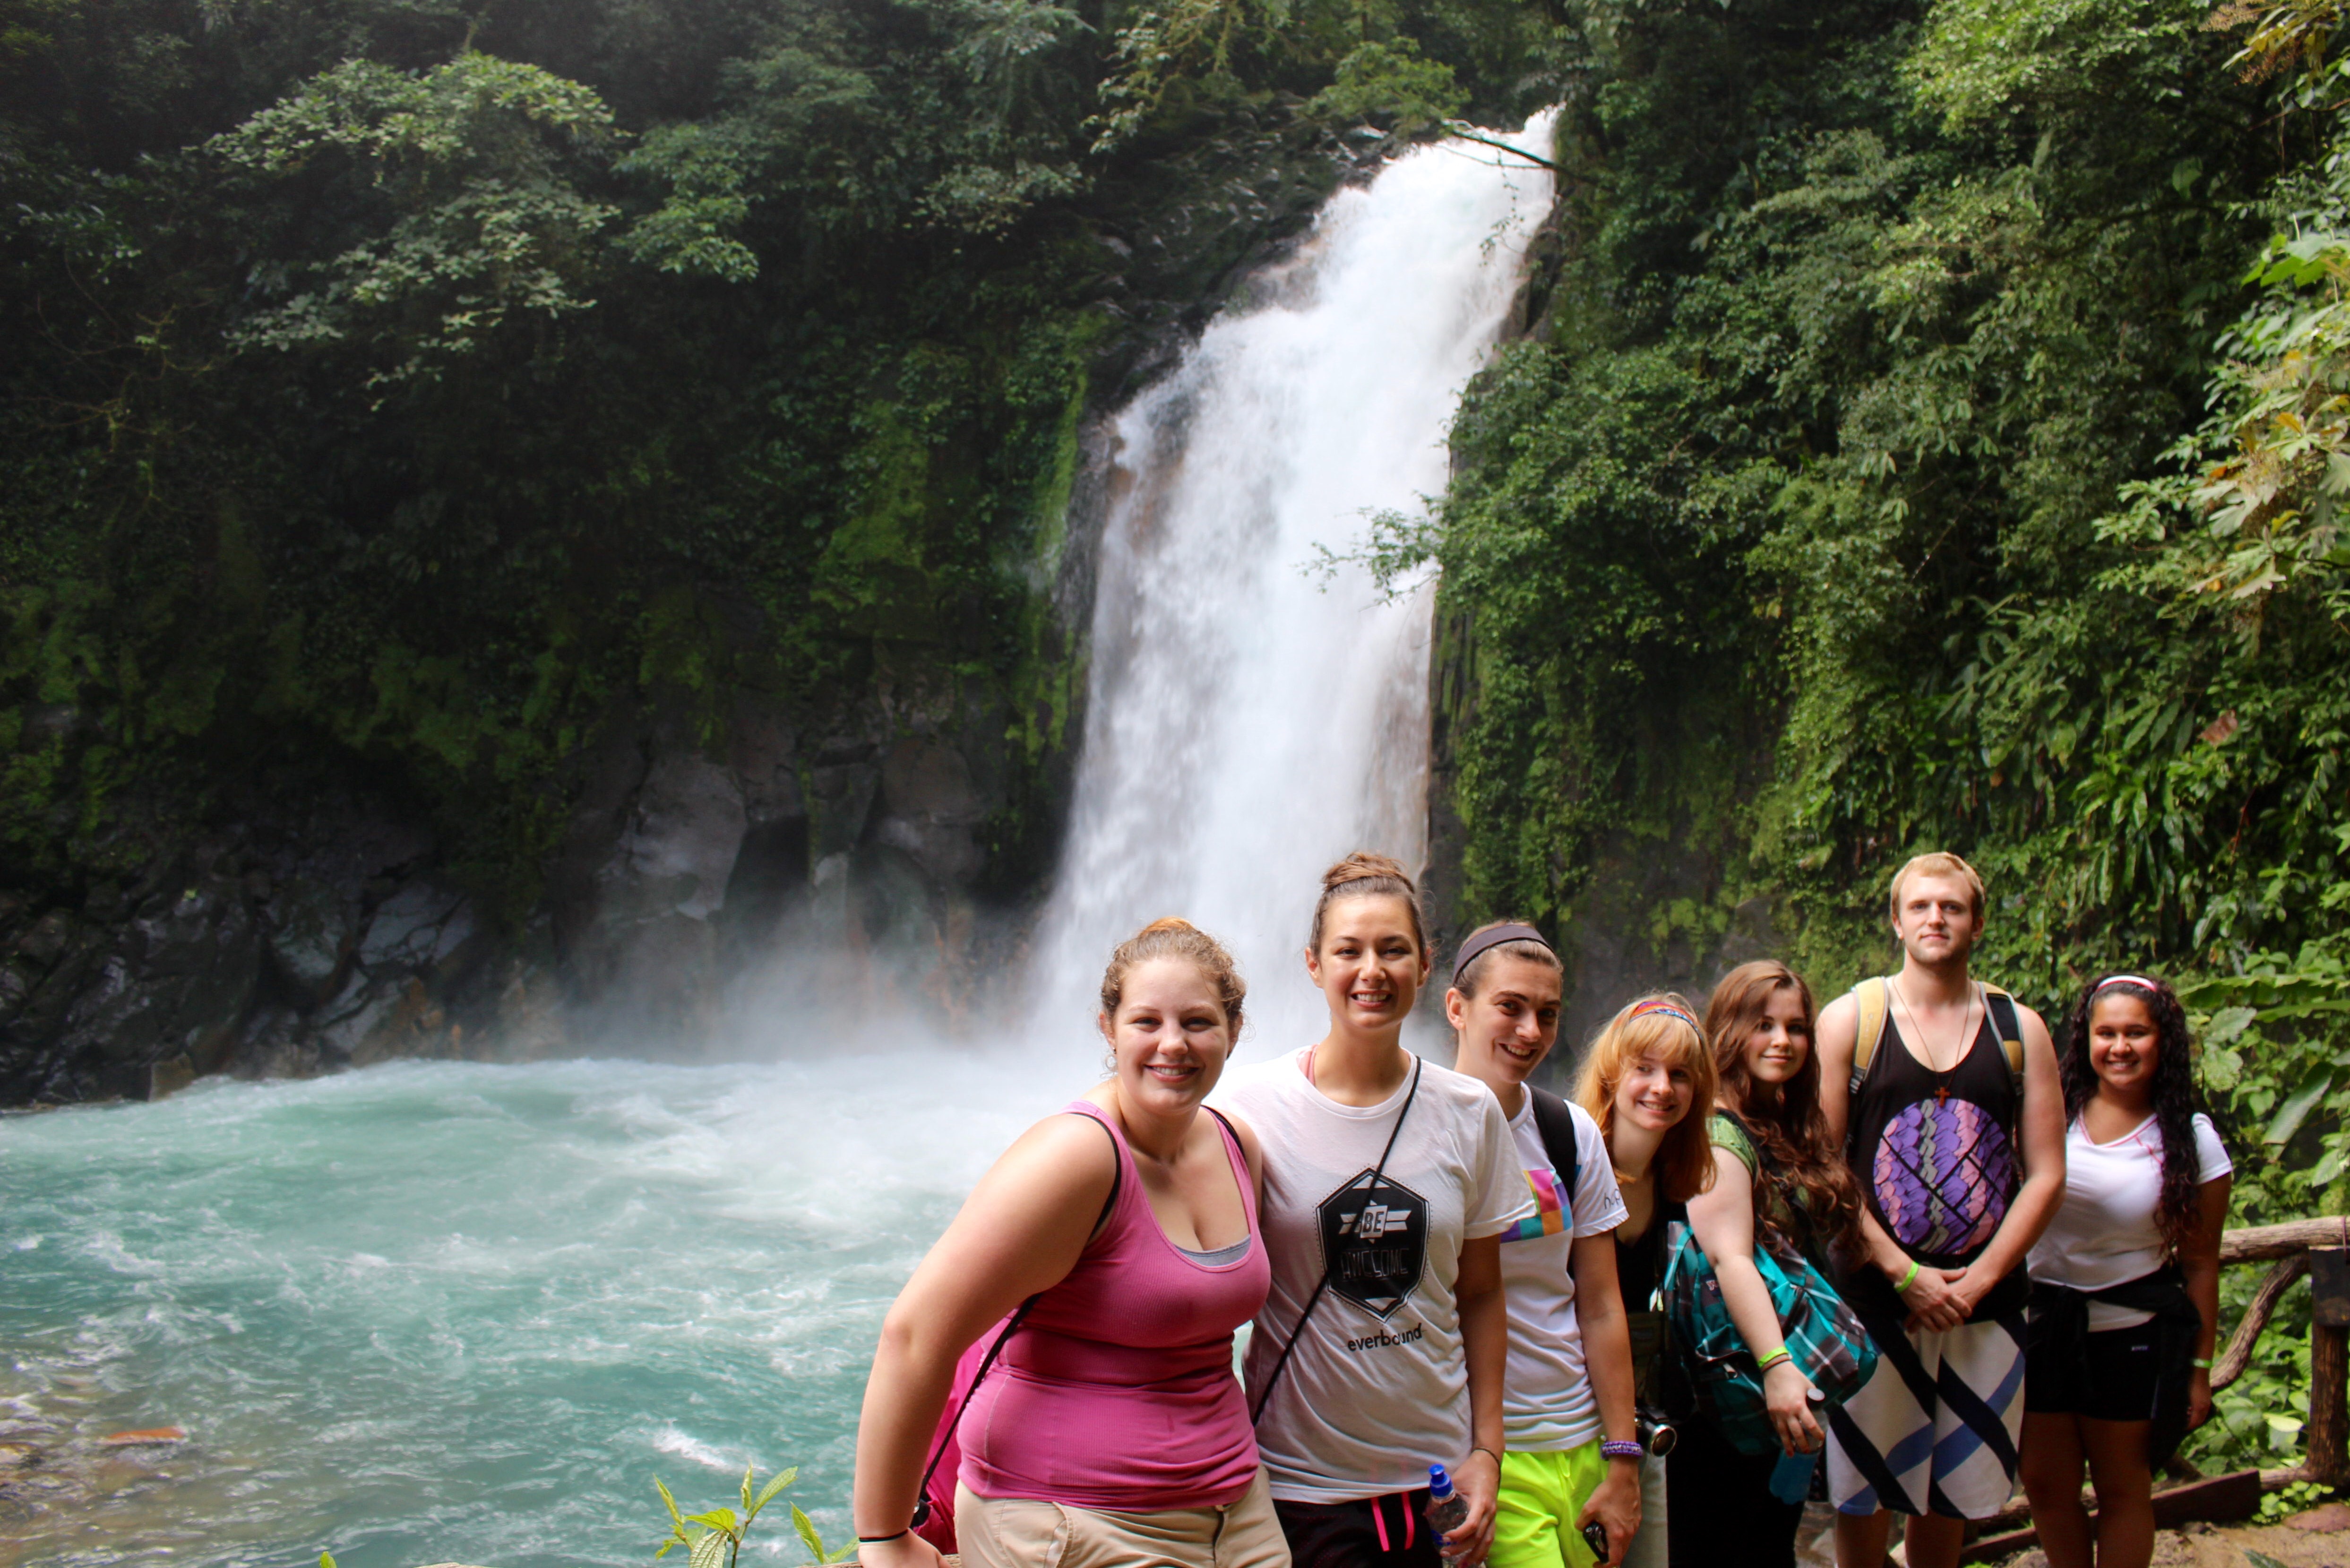 Modern Languages @ FLCC: Costa Rica Study Abroad 2015, 2015, Outdoor, Water, Tree, HQ Photo